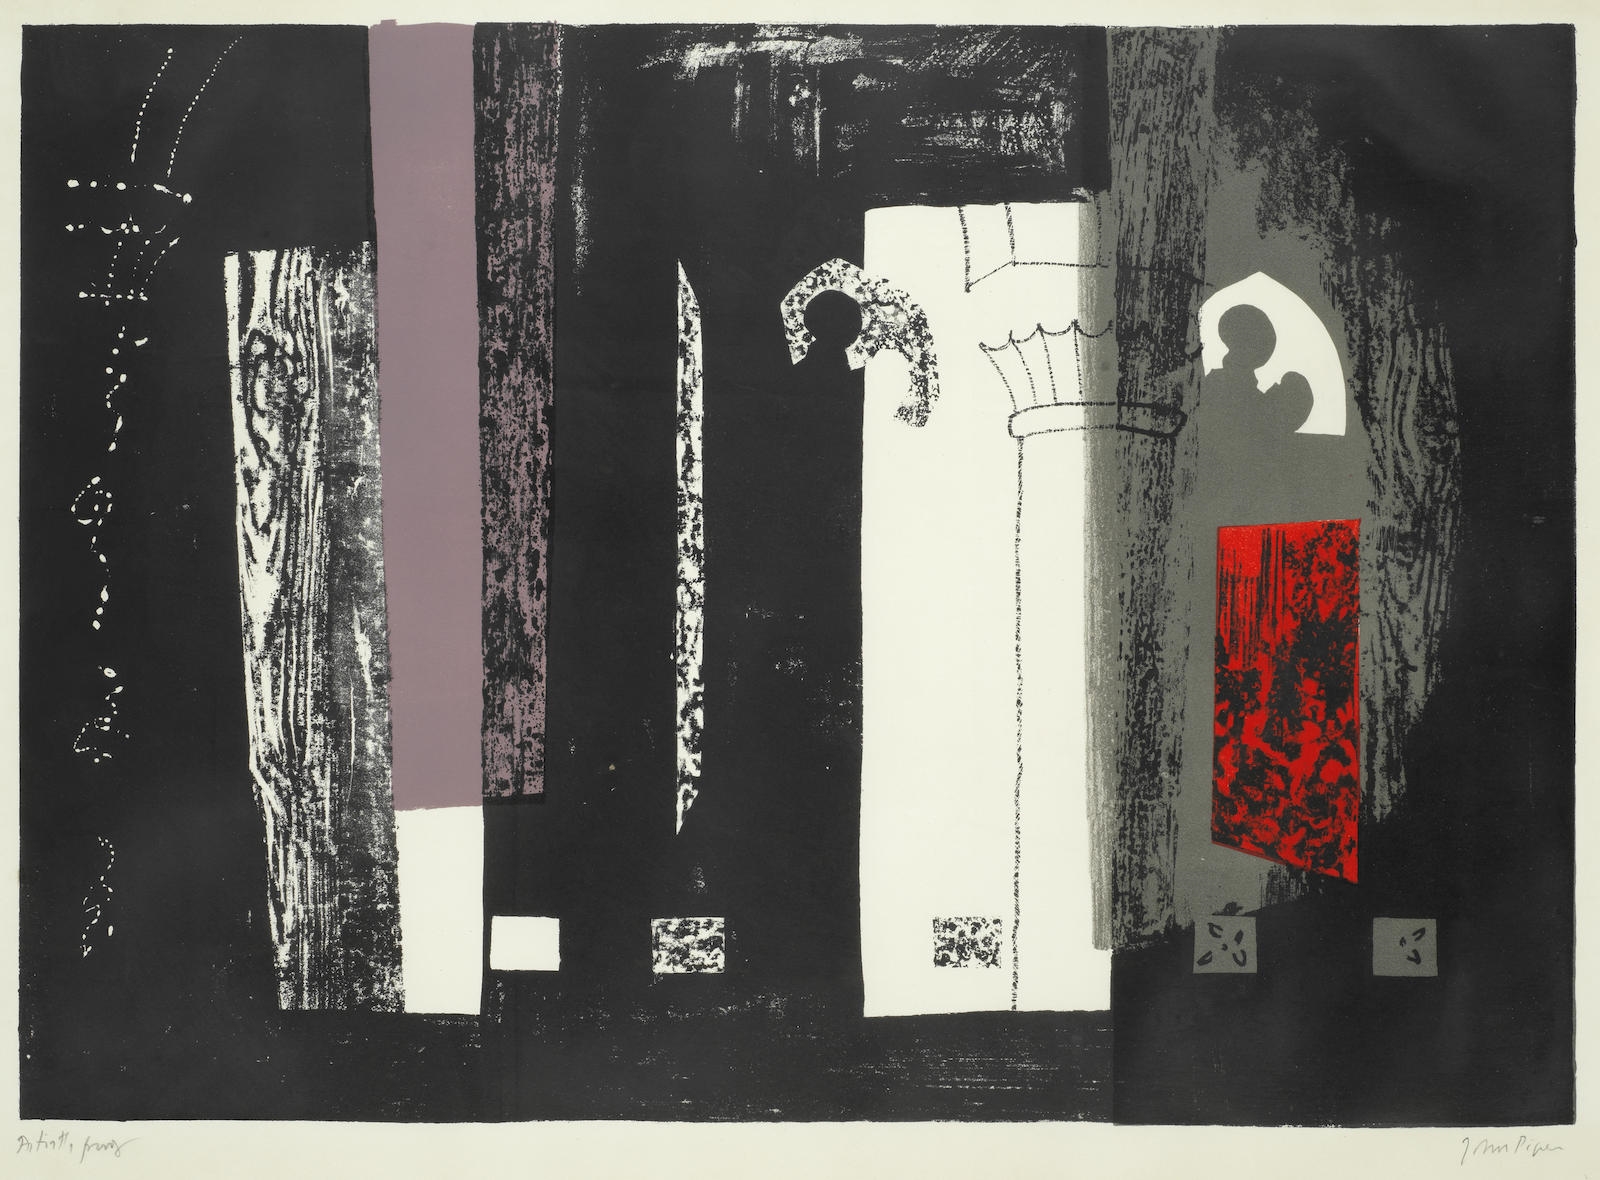 Inglesham, Wiltshire: a rustic medieval interior, from 'A Retrospect of Churches' by John Piper, 1964